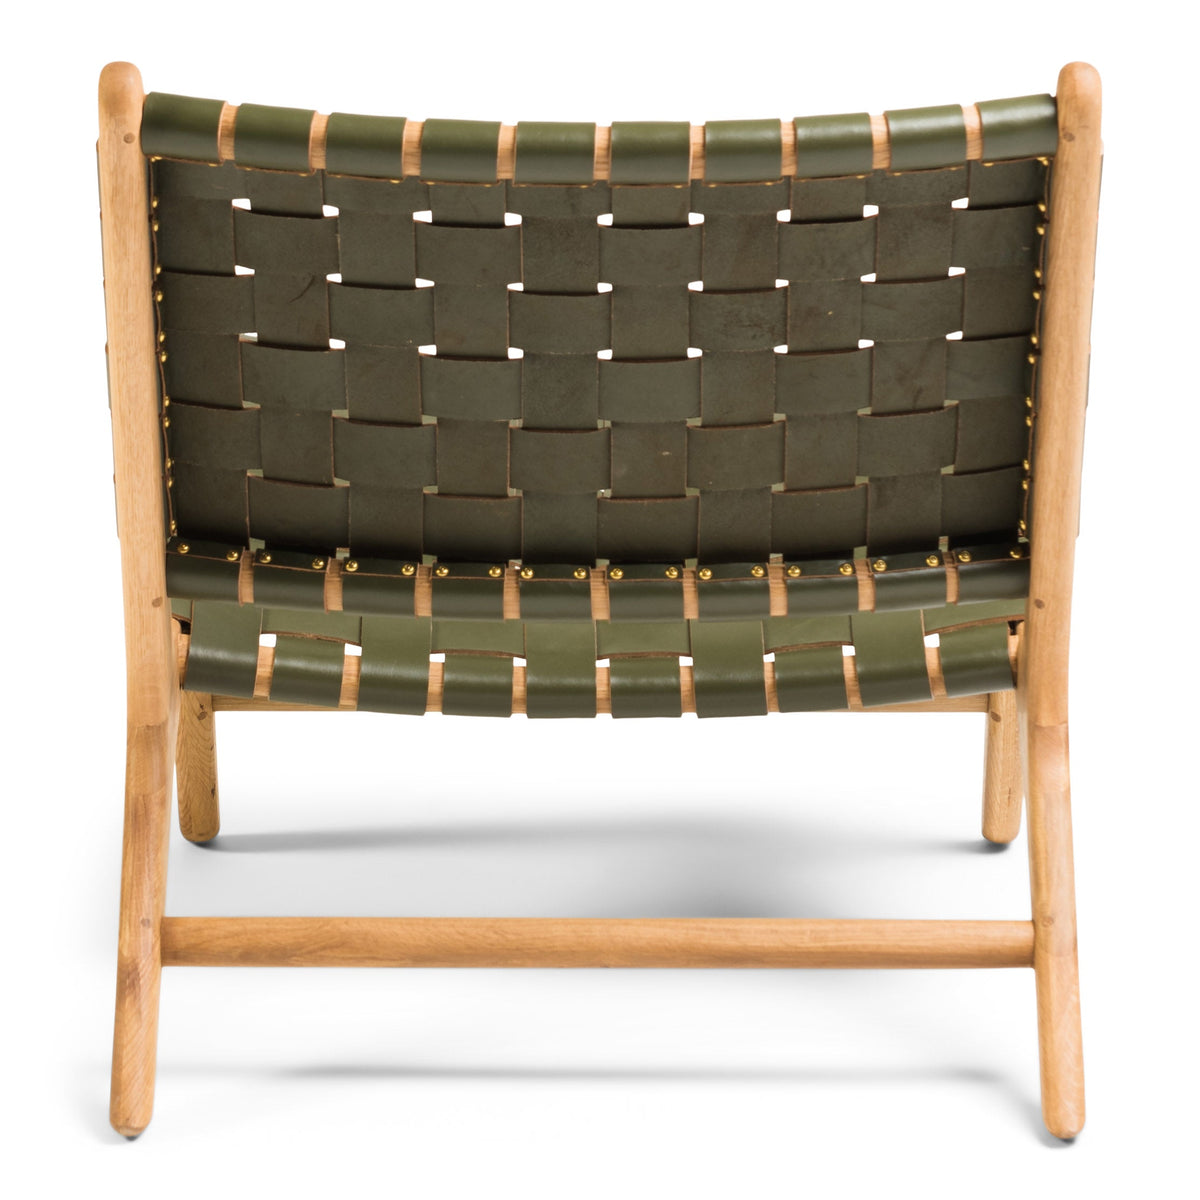 Clearance Tanner Armchair - Olive